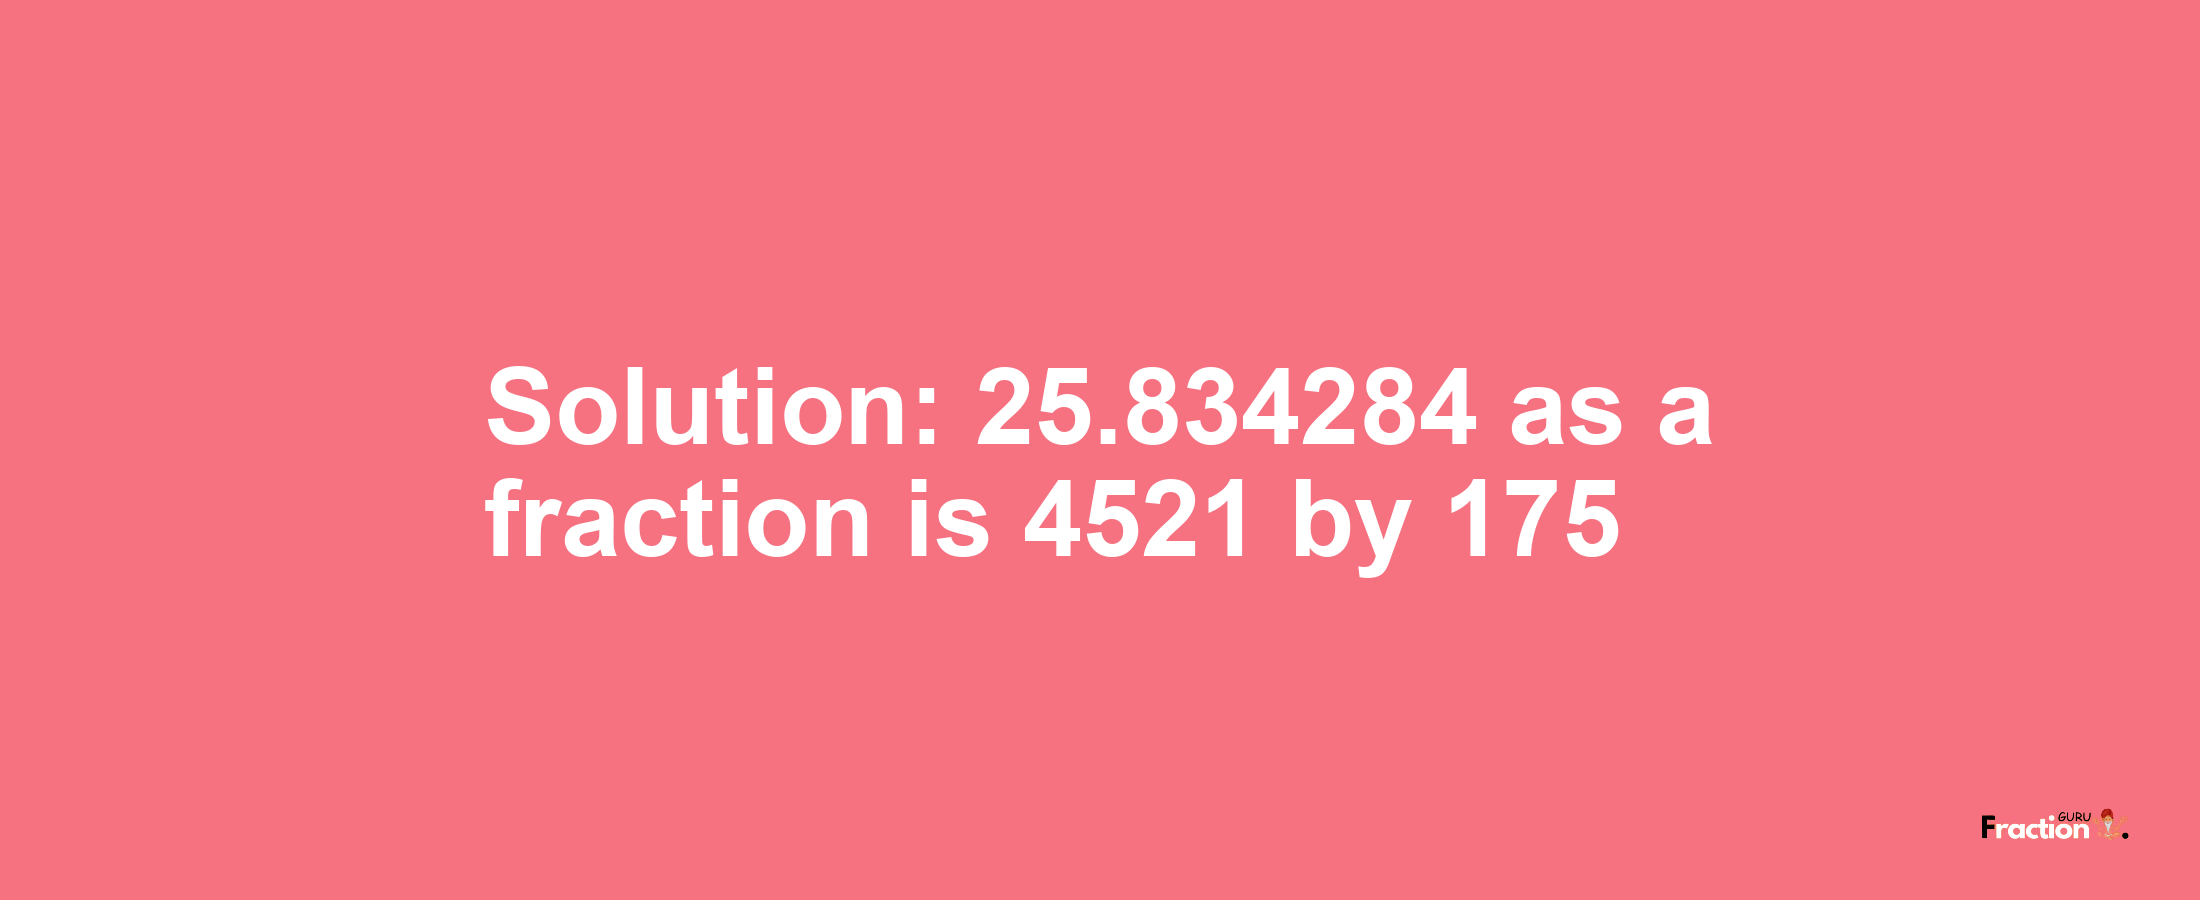 Solution:25.834284 as a fraction is 4521/175